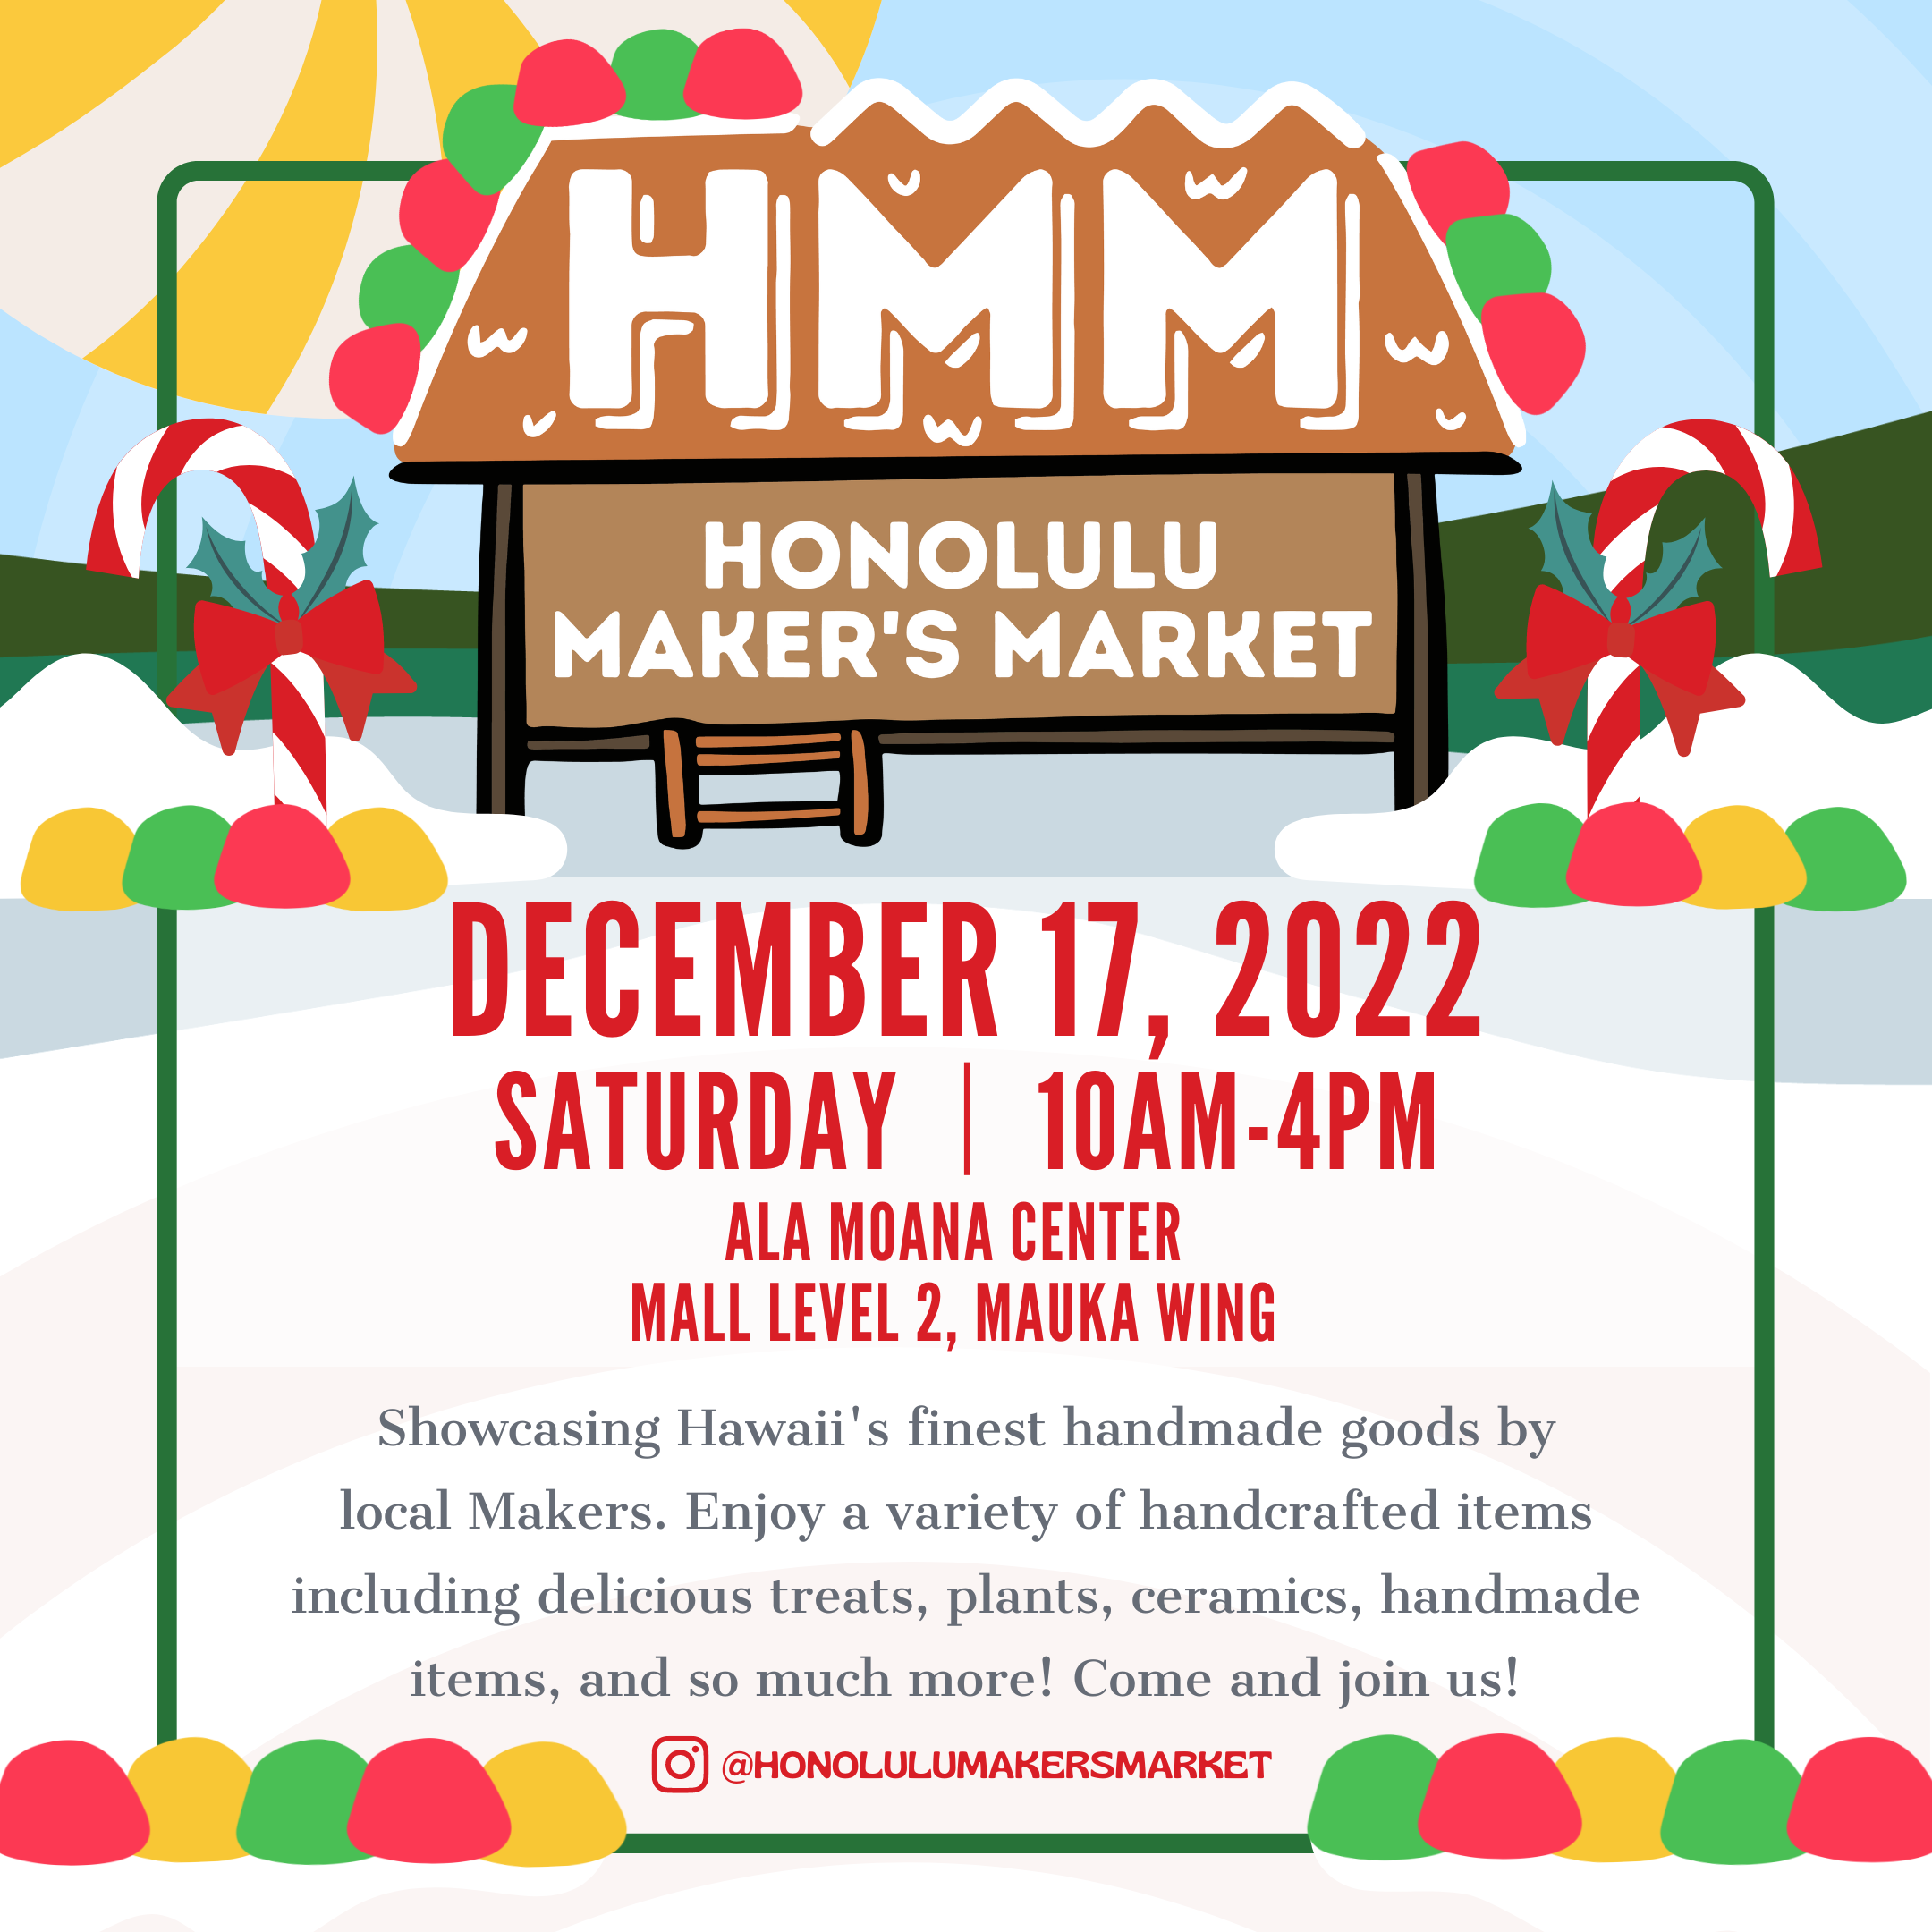 Honolulu Makers Market Flyer on Saturday, 12/17/22 from 10am to 4pm on Mall Level 2, Mauka Wing